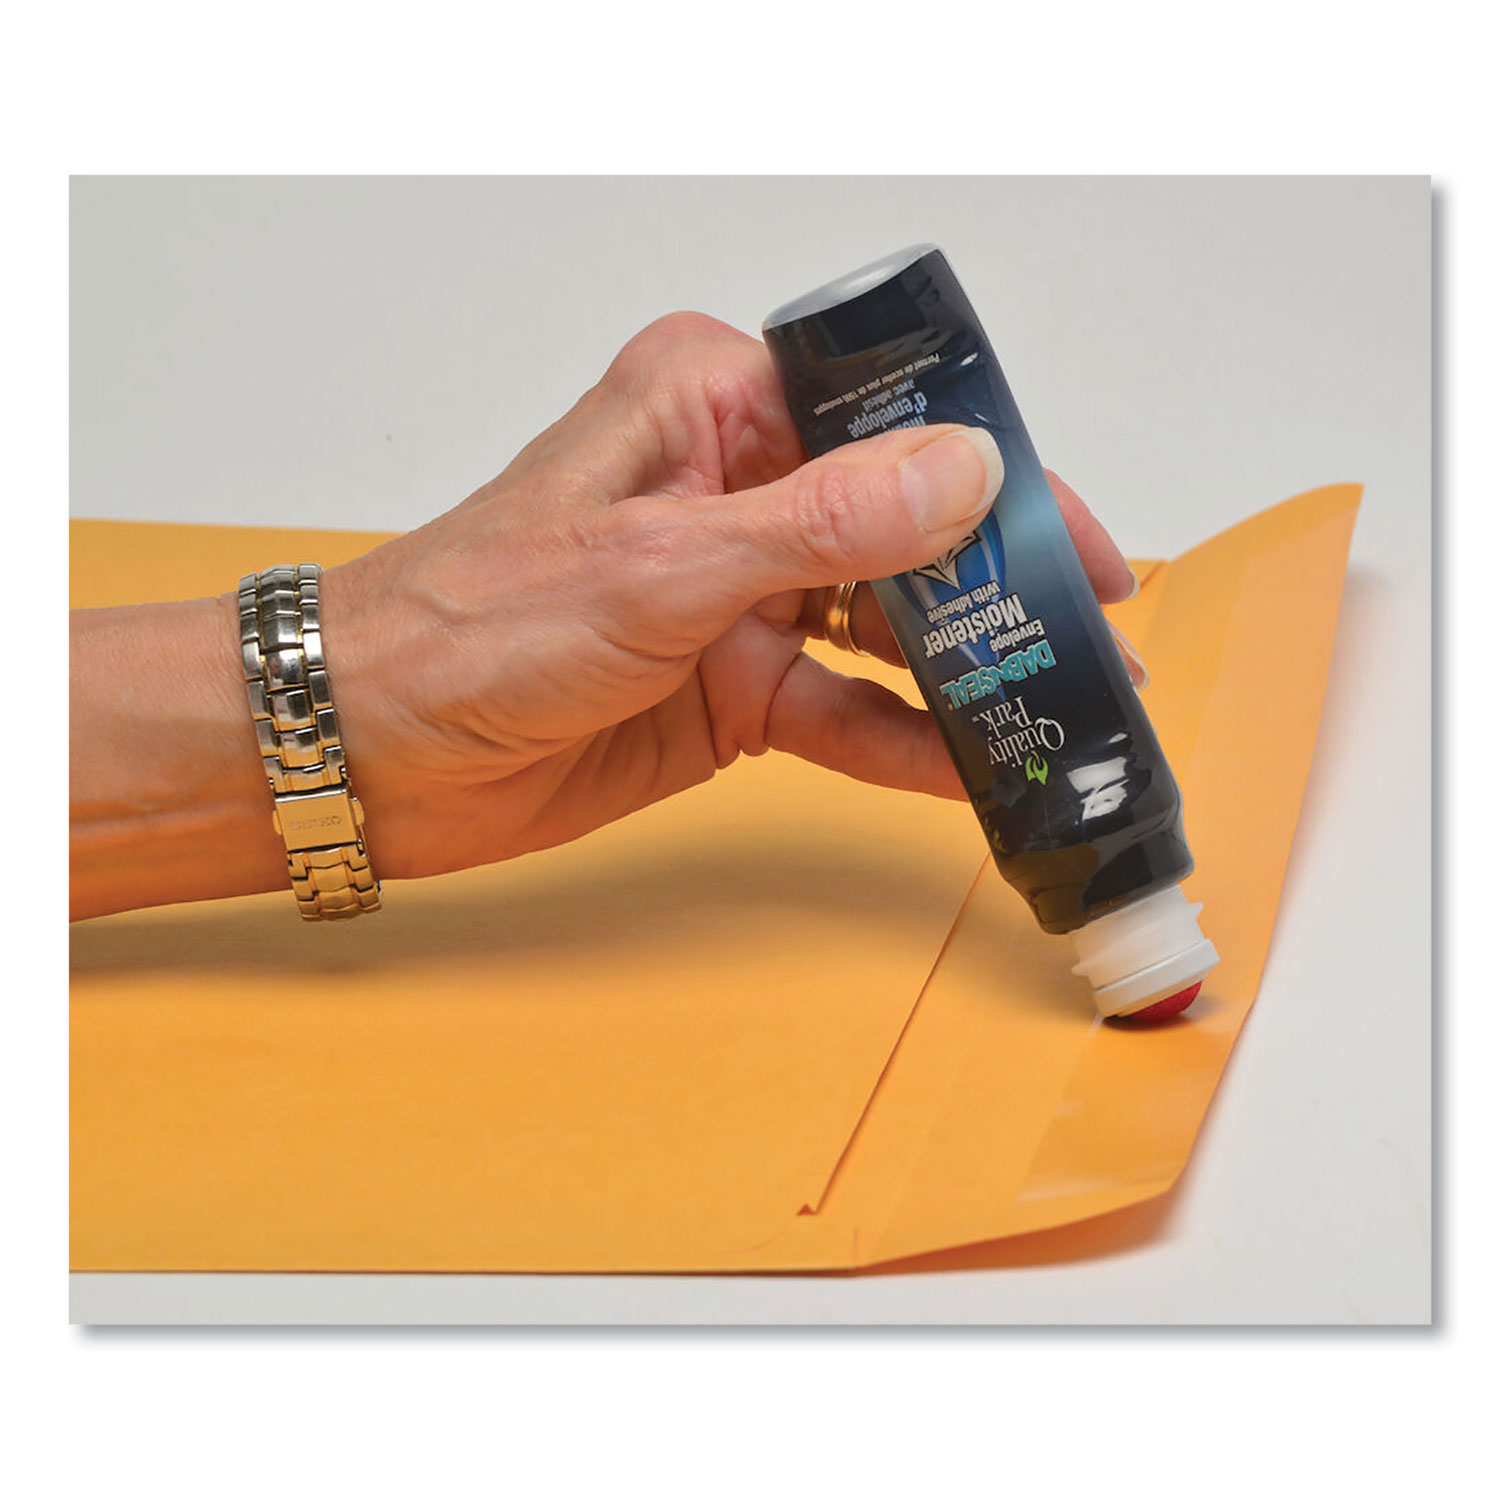 Quality Park Dab-N-Seal Envelope Moistener with Adhesive, 50ML